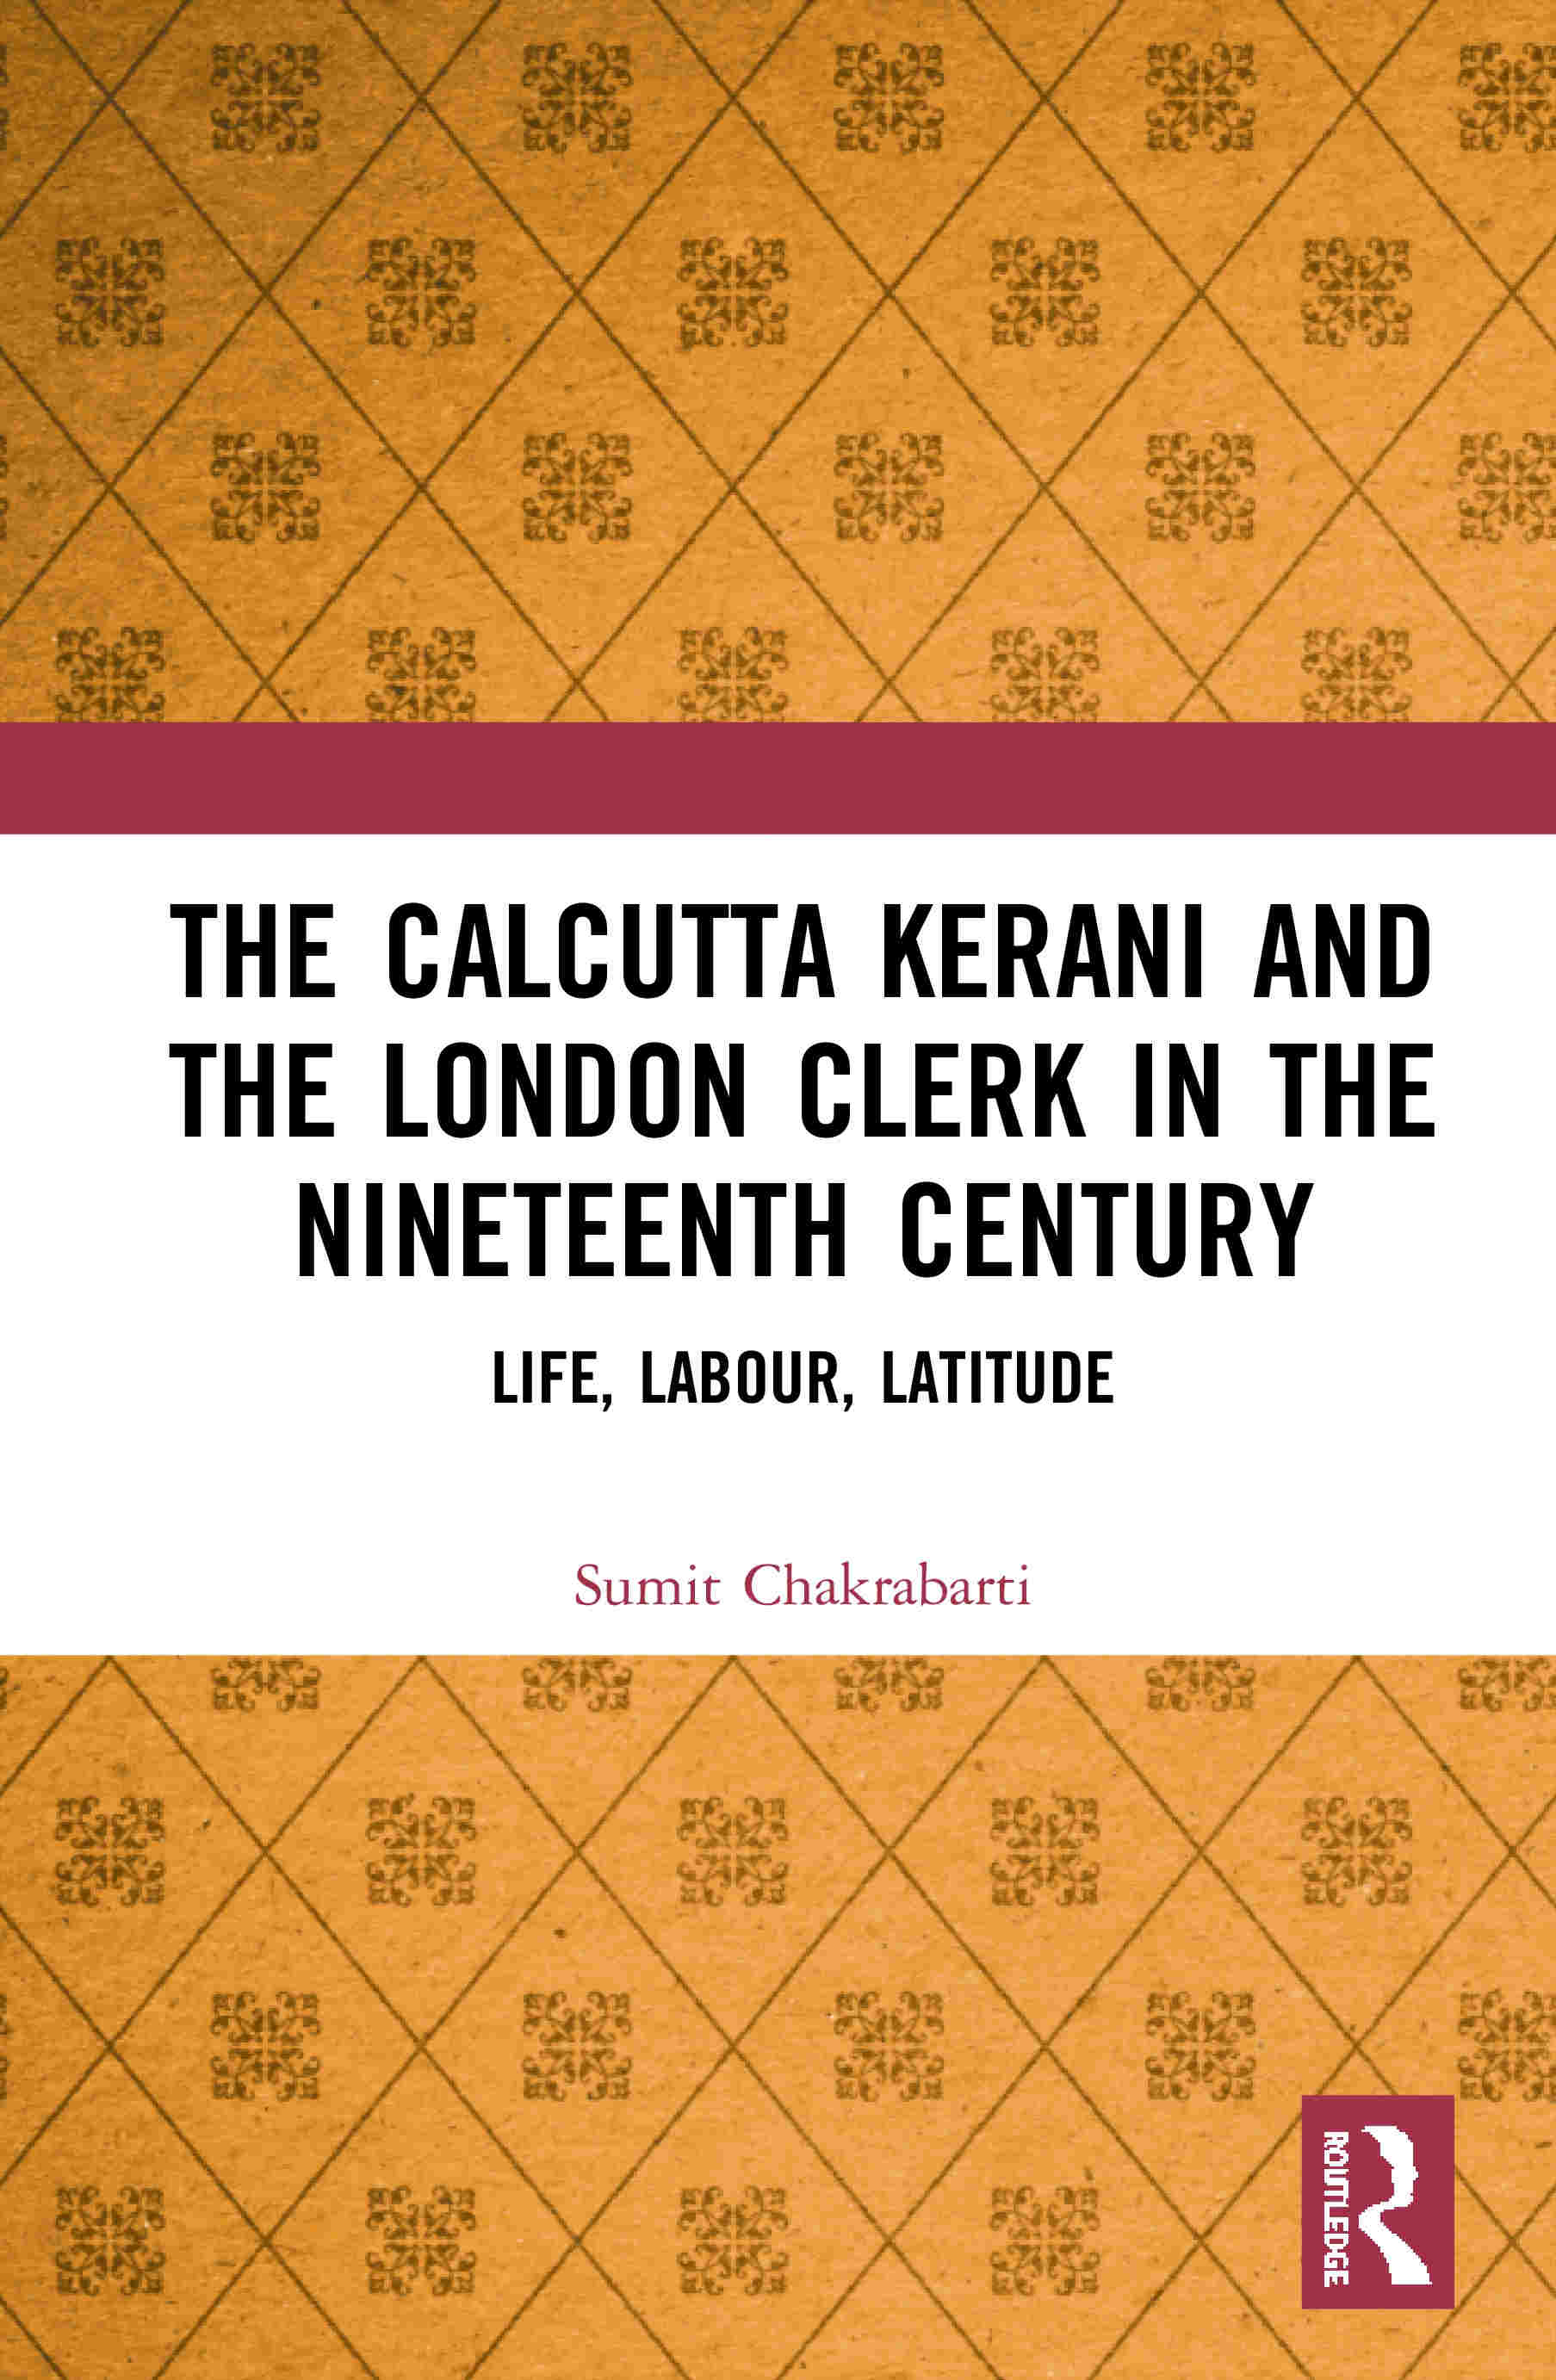 The Calcutta Kerani and the London Clerk in the Nineteenth Century: Life, Labour, Latitude by Sumit Chakrabarti, Routledge, £120